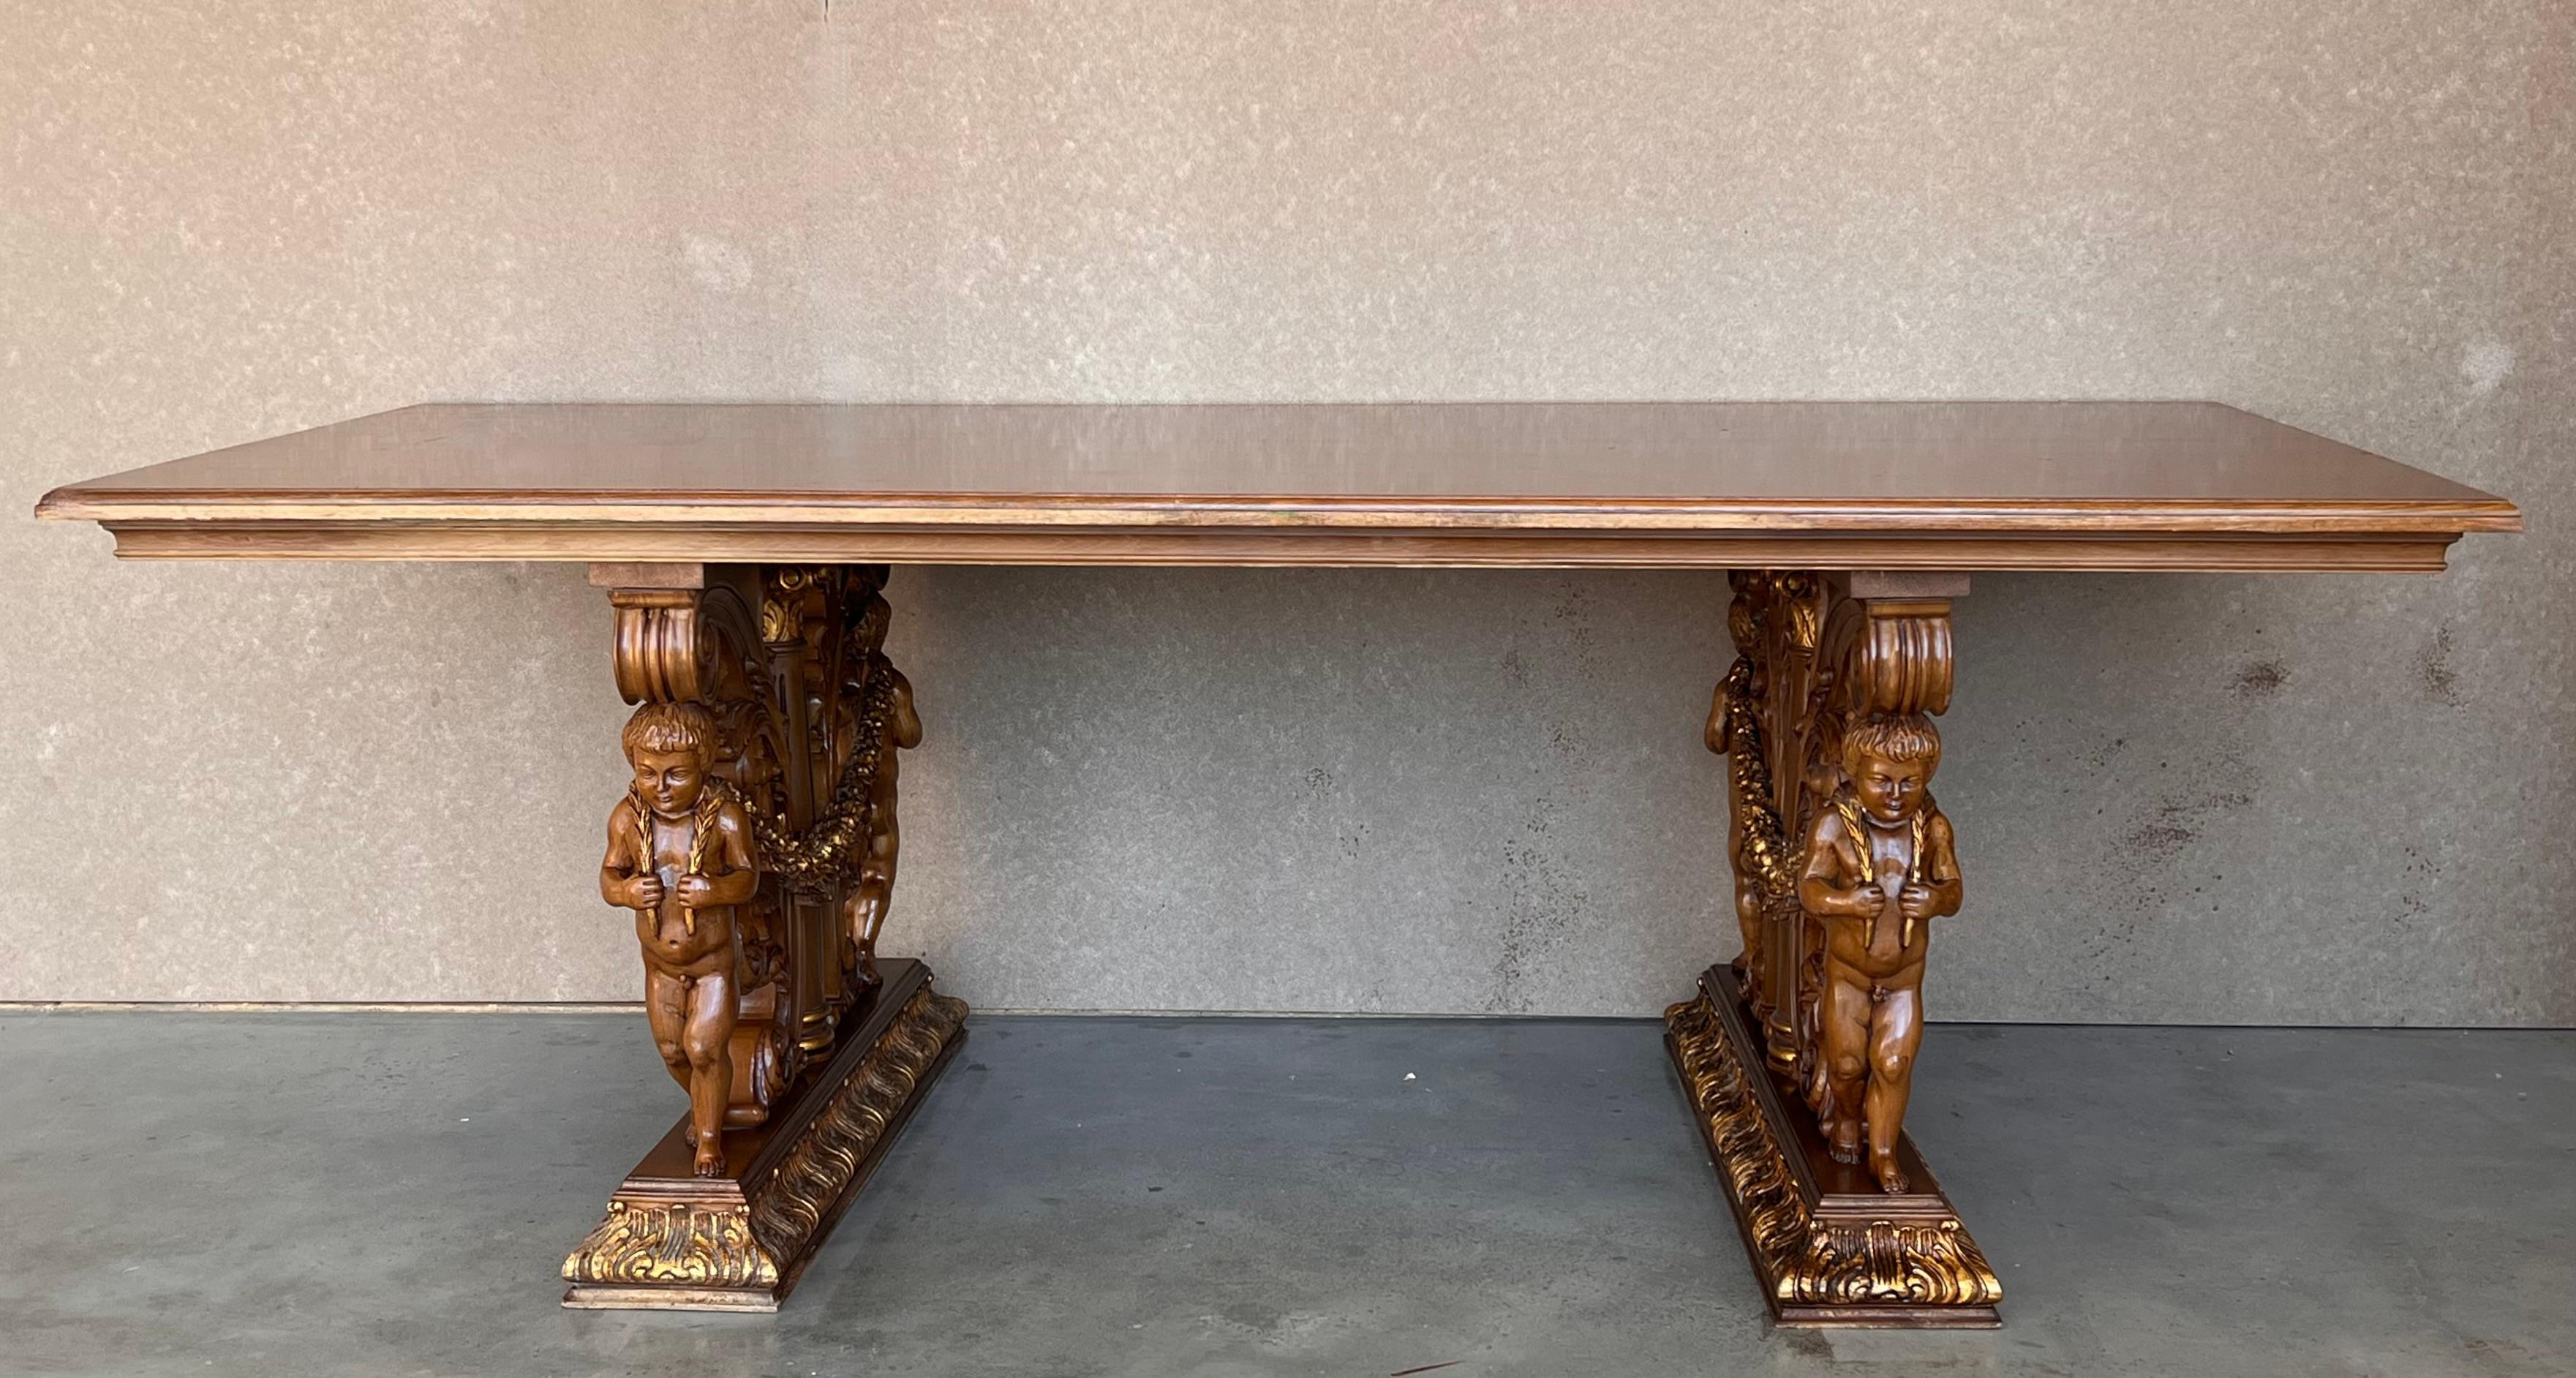 Neoclassical Early 20th Century French Carved Bleached Oak Marquetry Center or Dining Table For Sale